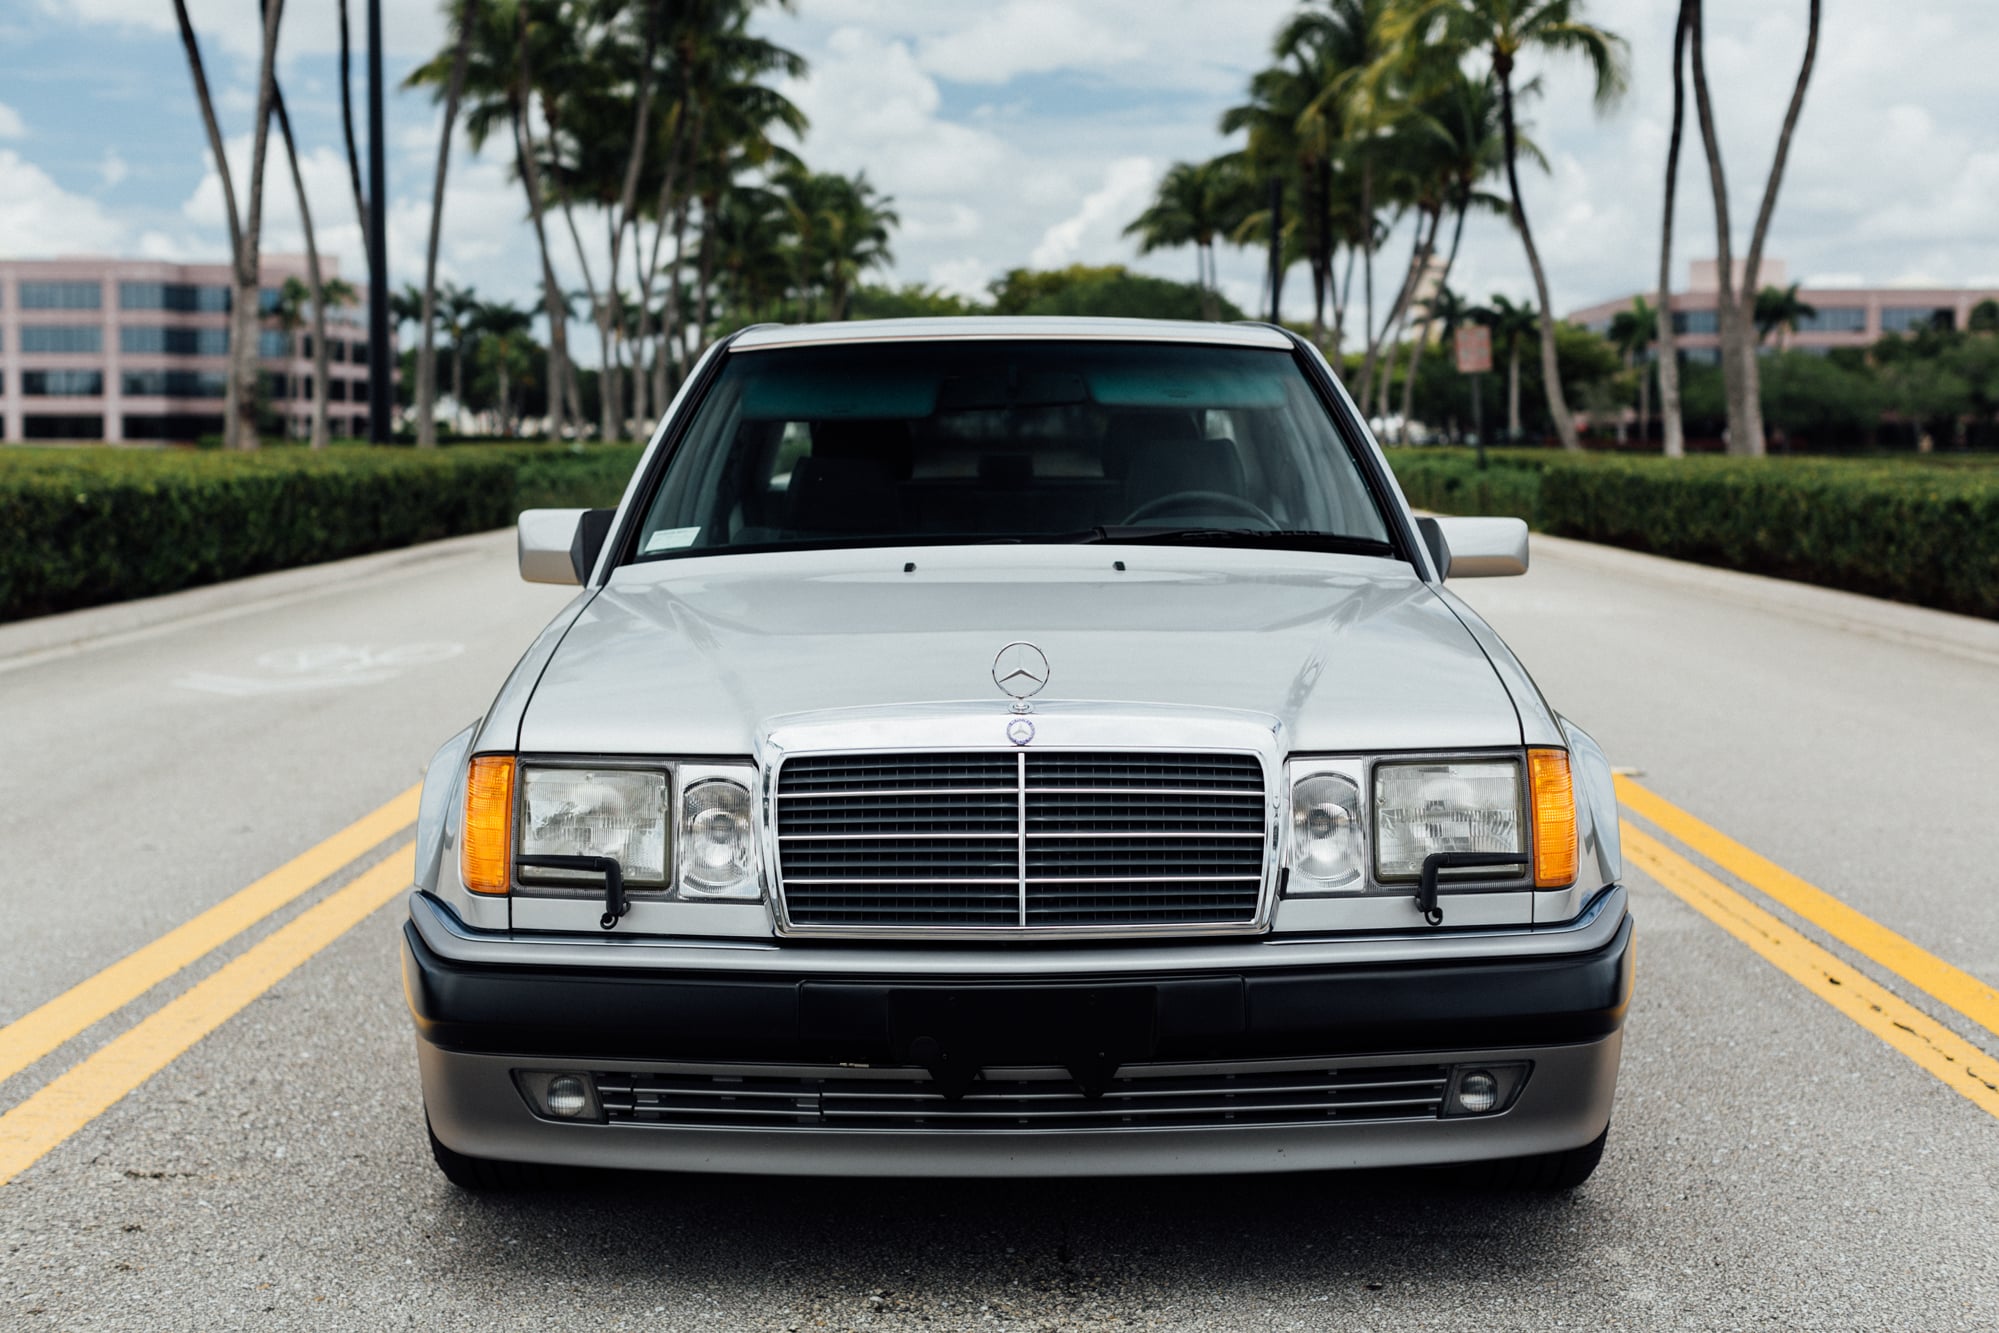 1992 Mercedes-Benz 500E (W124) | Stunning Condition Inside Out | Beautifully Kept | 23 Years of Documentation $65000 in service | Fully Documented History | Turn Key